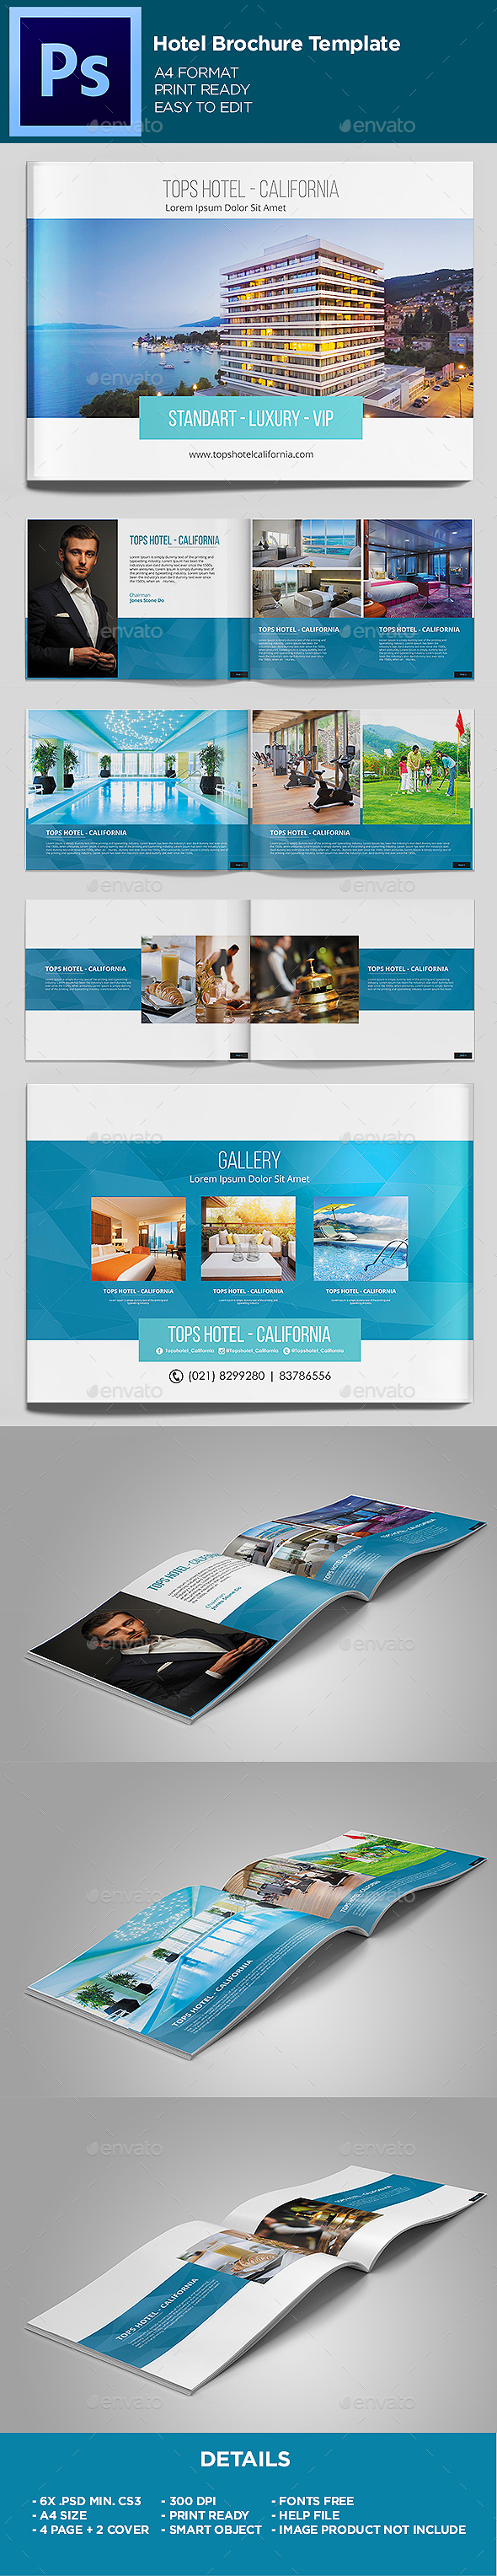 Download Hotel Brochure Graphics Designs Templates From Graphicriver PSD Mockup Templates